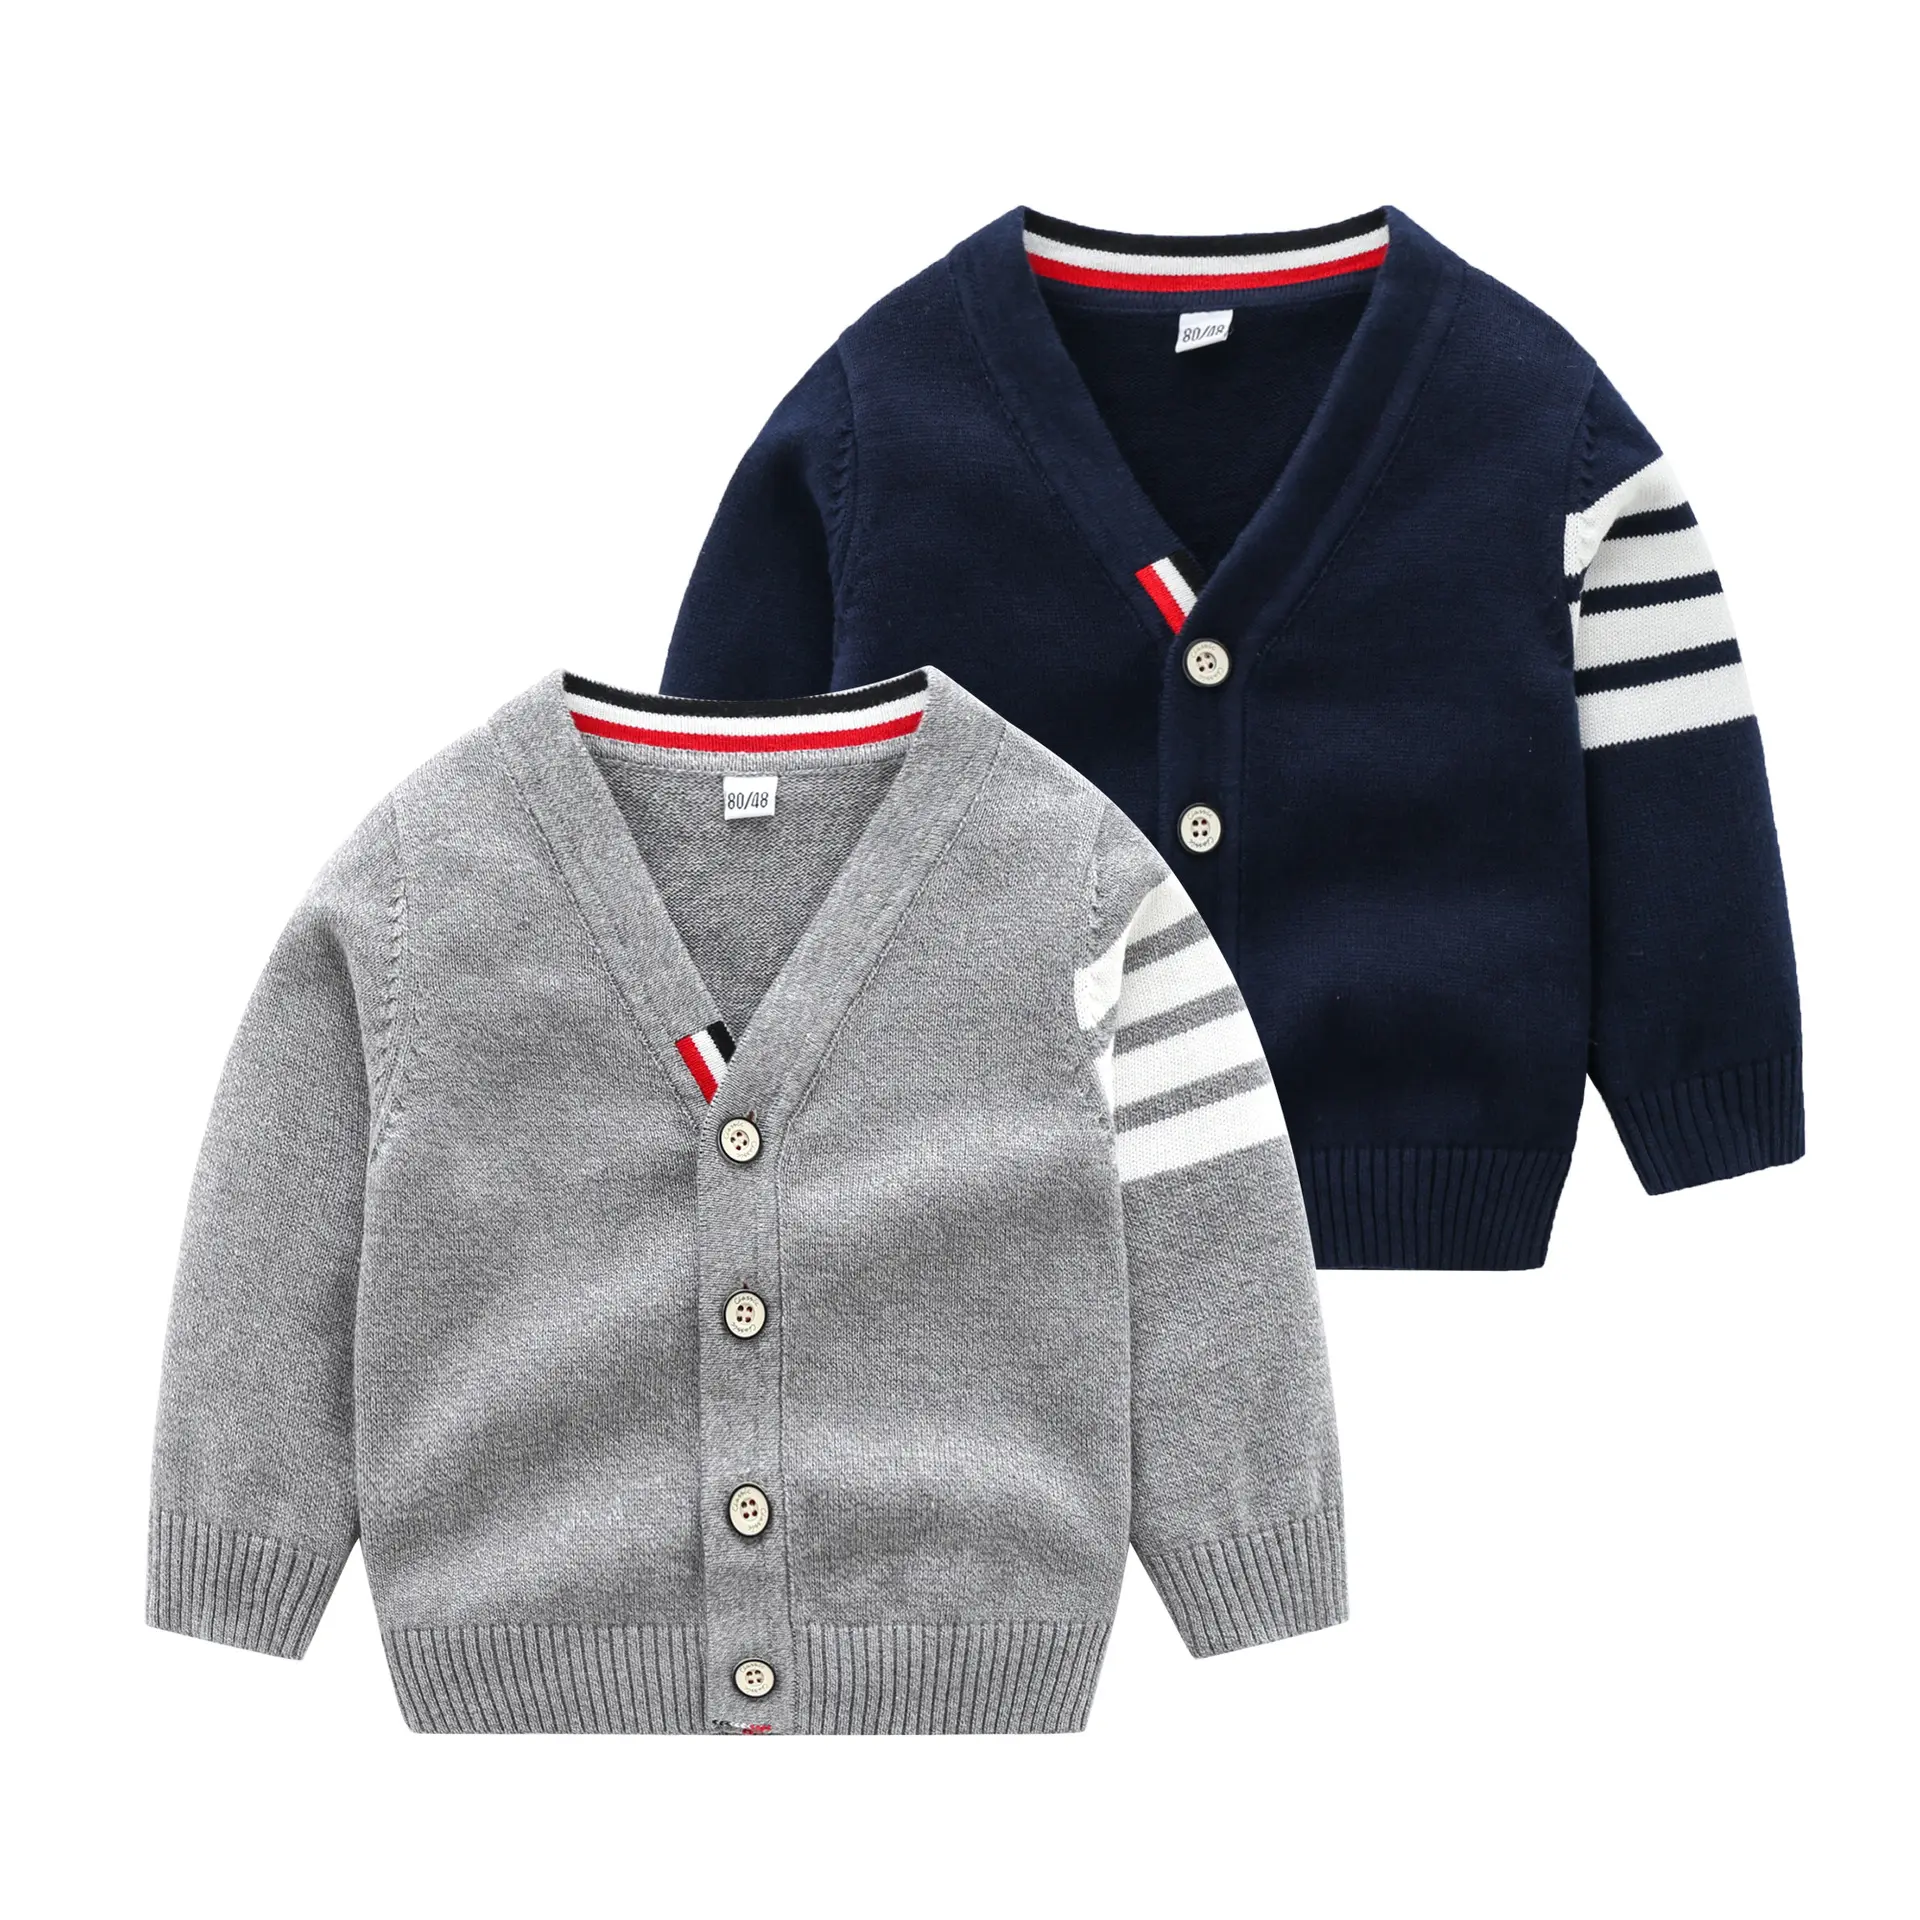 2020 Autumn Long Sleeve Soft Cotton Knit Sweater Design for Kids Baby Cardigan